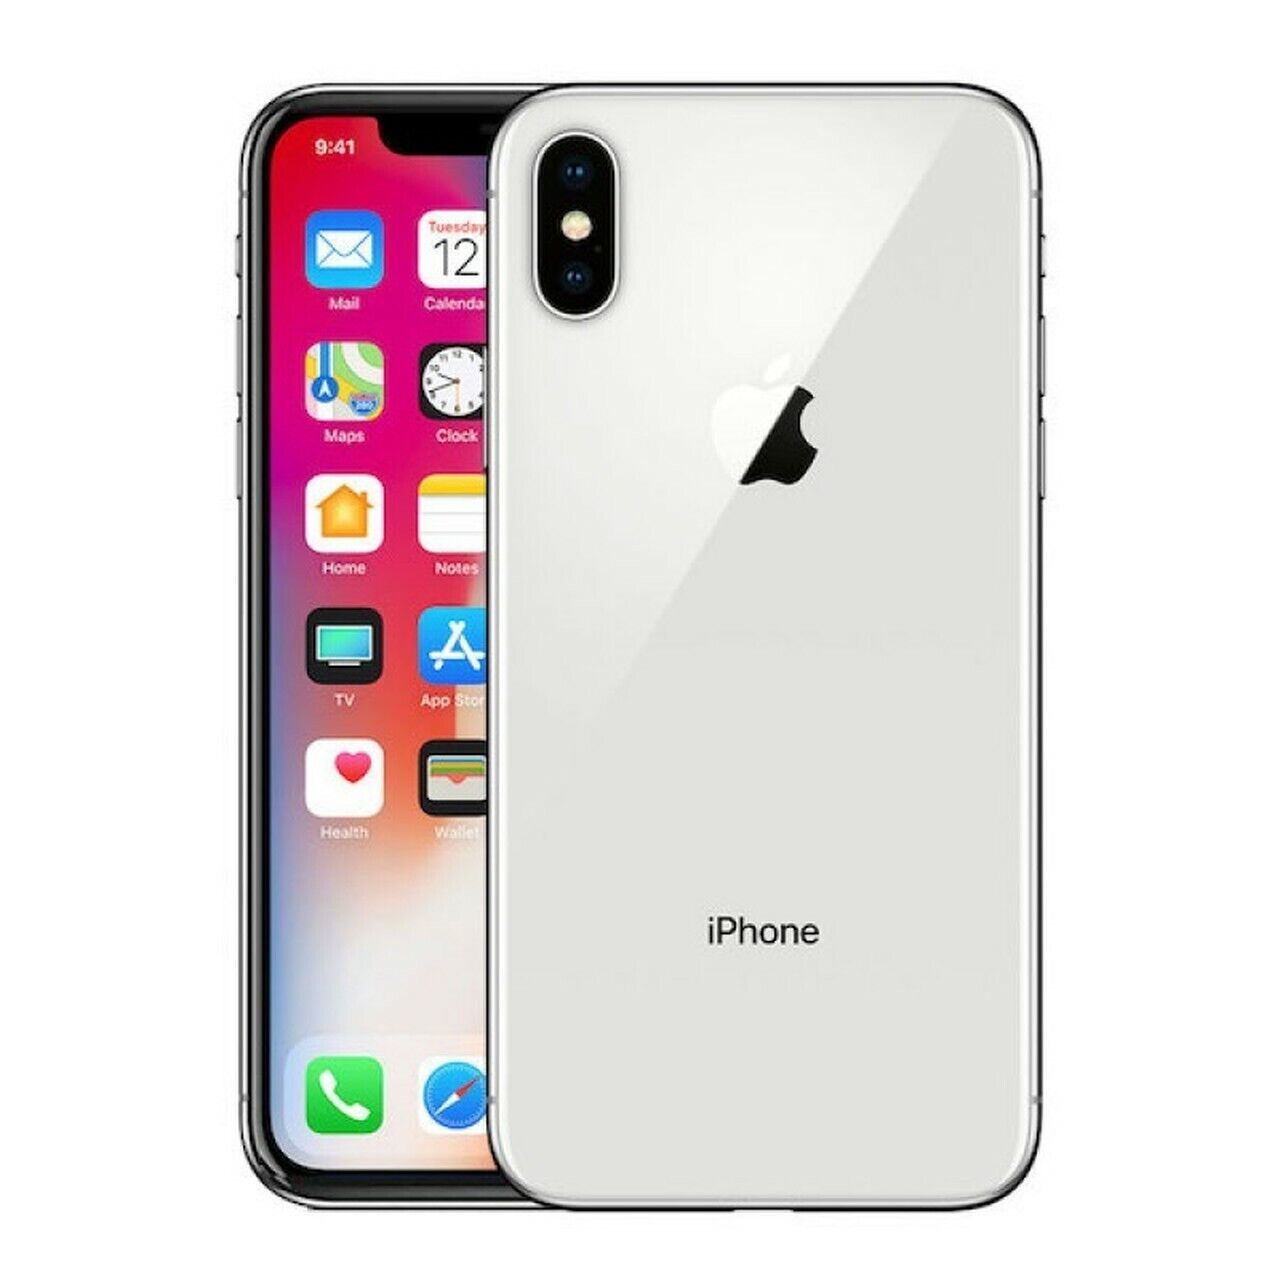 Apple iPhone X - 256GB - Silver (Unlocked) A1901 (GSM) for sale 